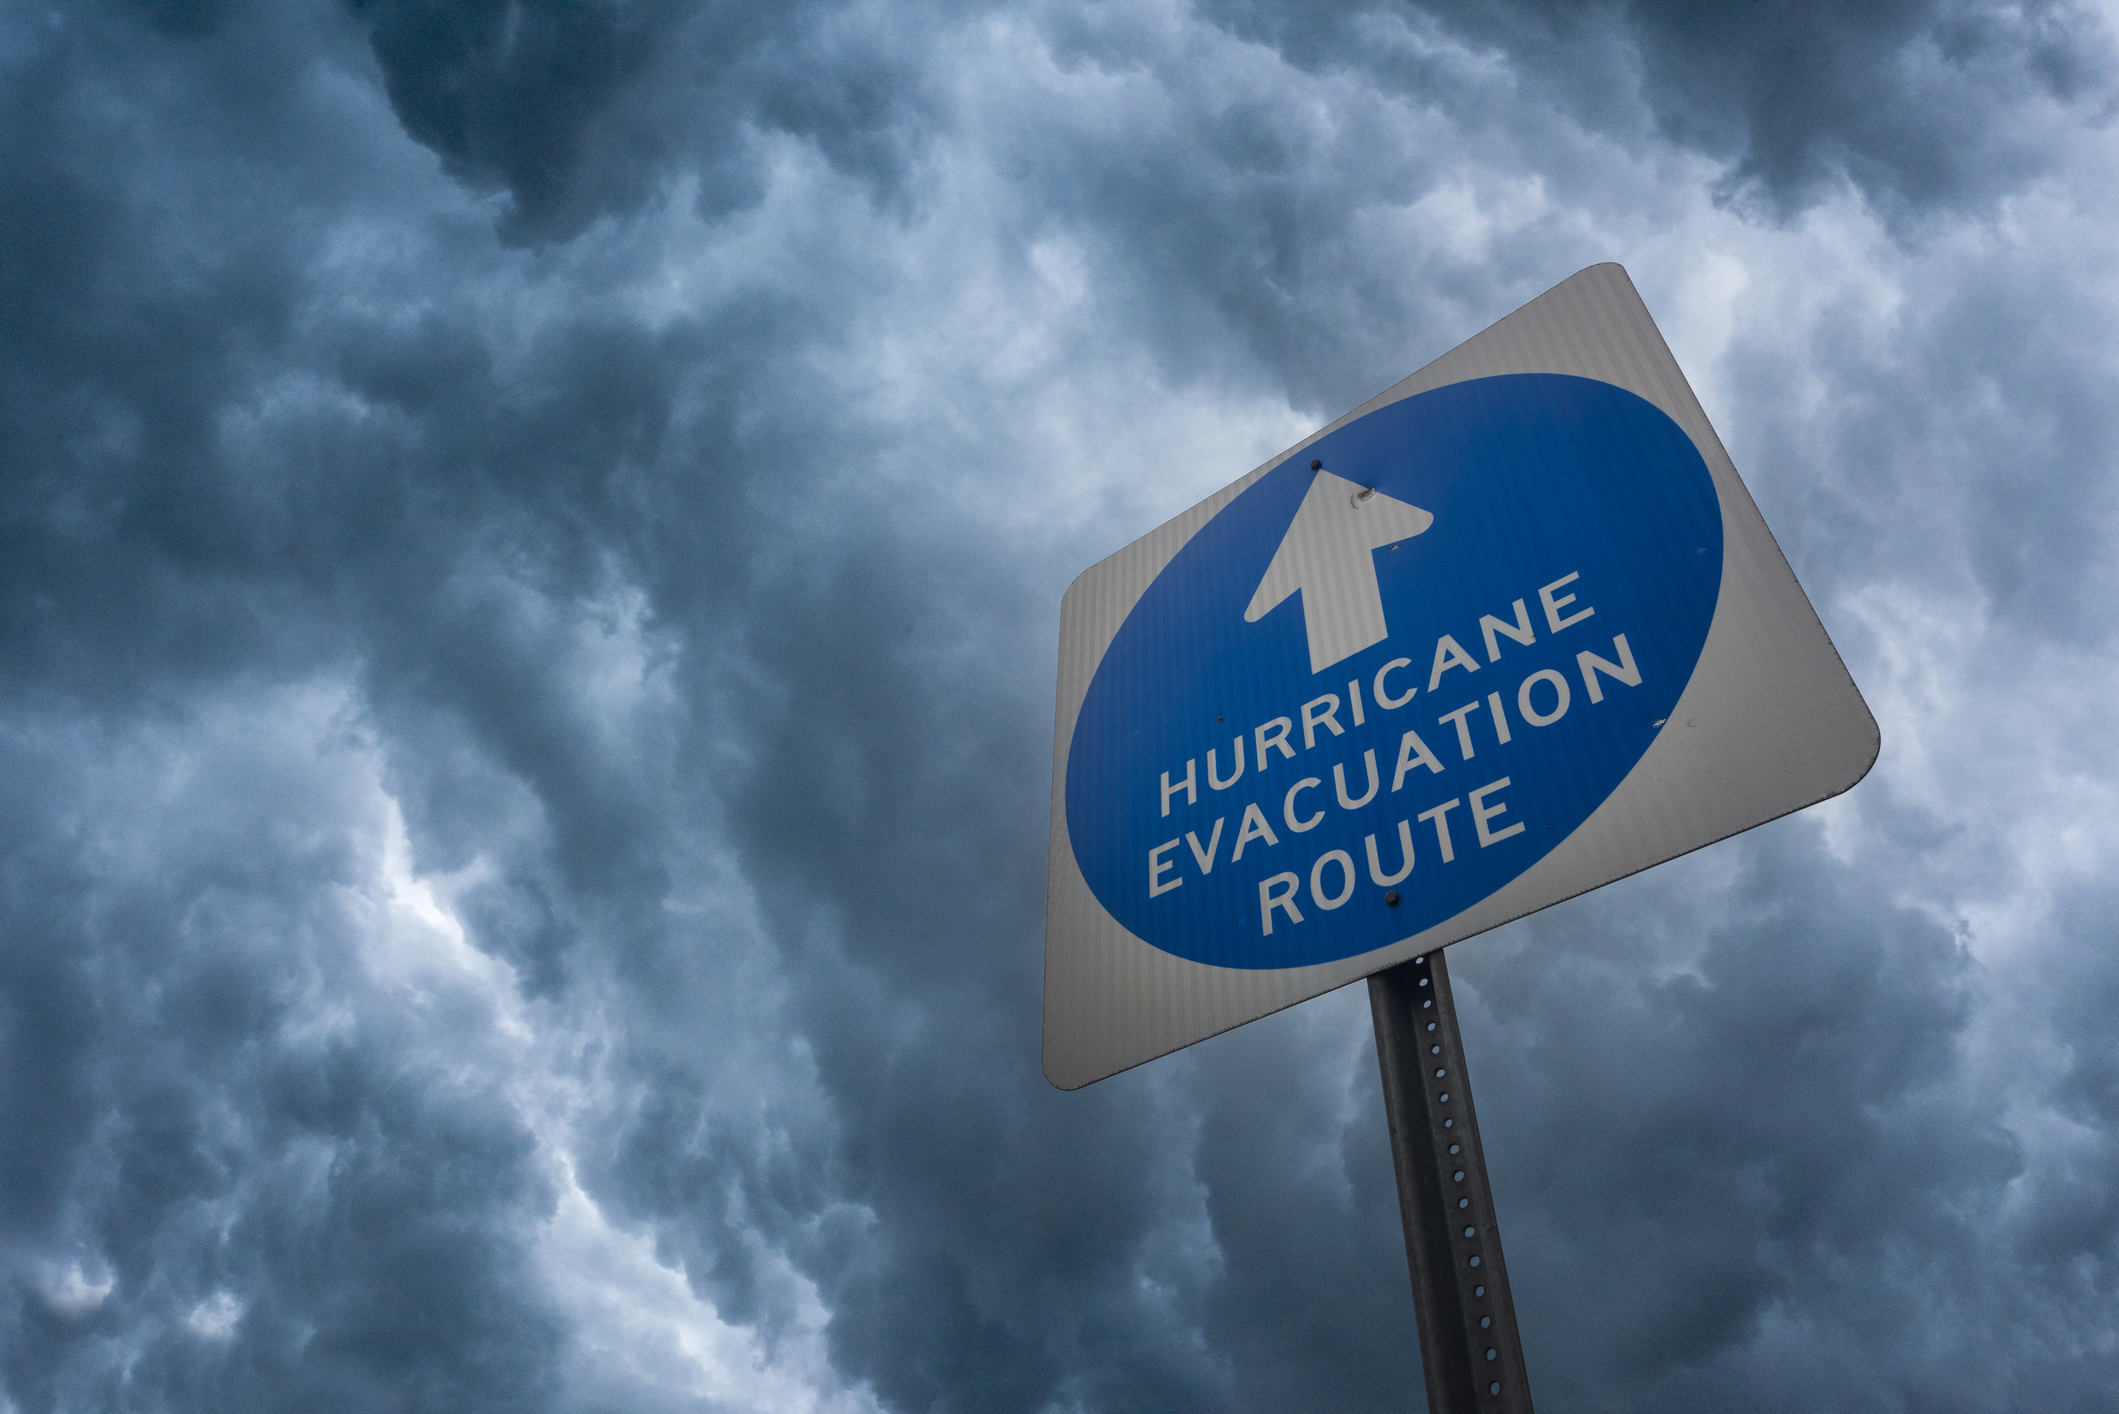 Composite image of a hurricane evacuation route sign against a stormy sky.